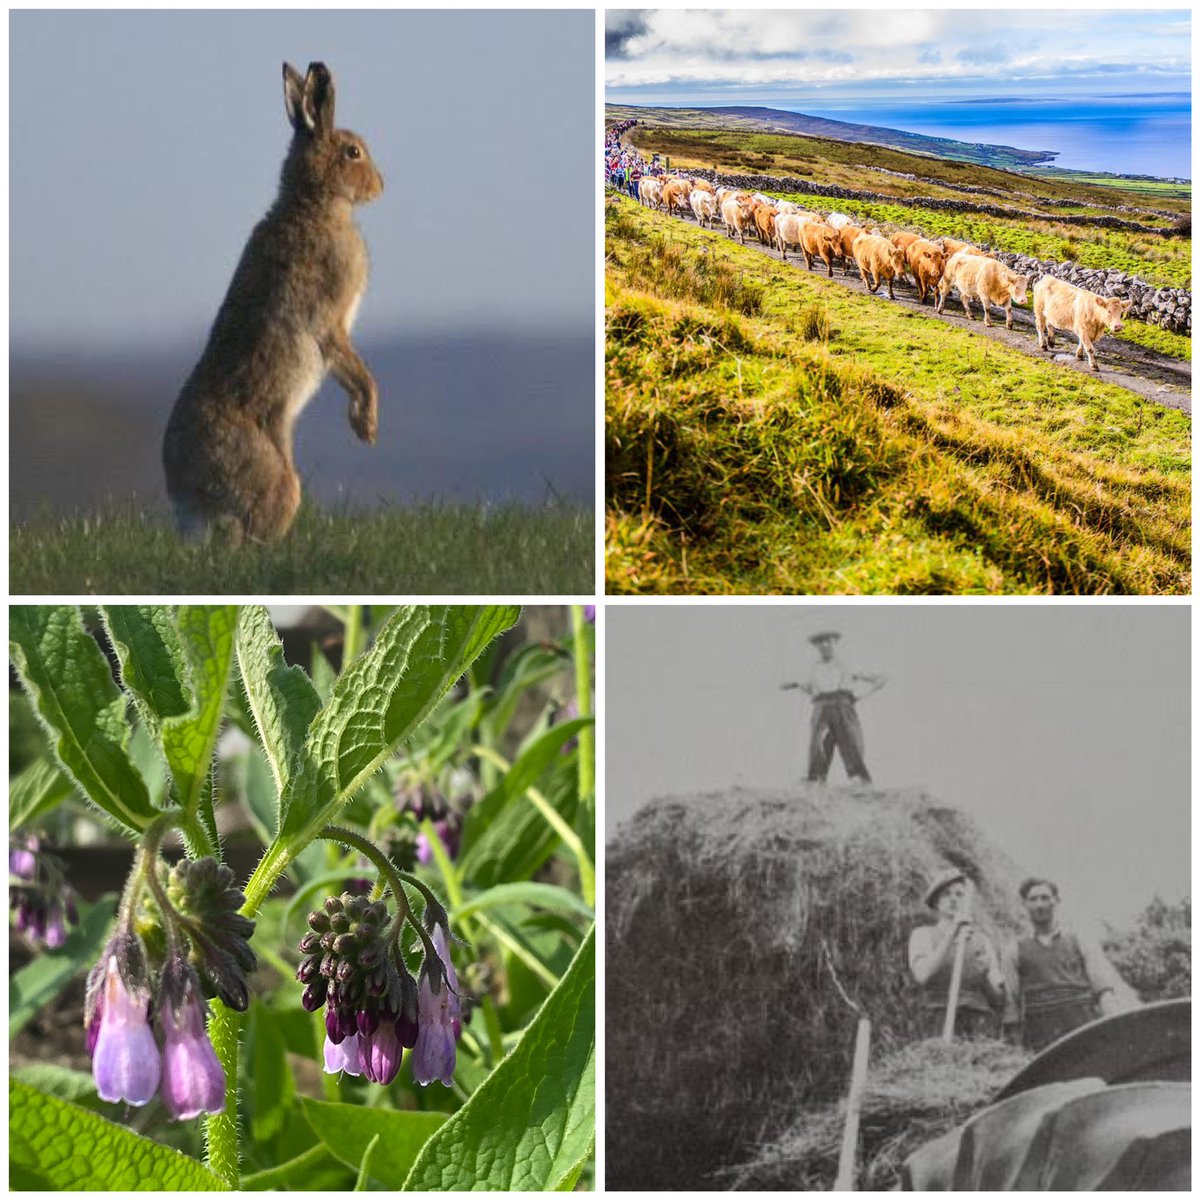 “The Past is our Future”: stories from the Cuimhneamh an Chláir archive of traditional farming in Co. Clare and their lessons for environment and biodiversity. A National Biodiversity Week event at Kilfenora Hall, Fri 24 May at 7pm. Free event. 😊 tinyurl.com/yapxsuj8